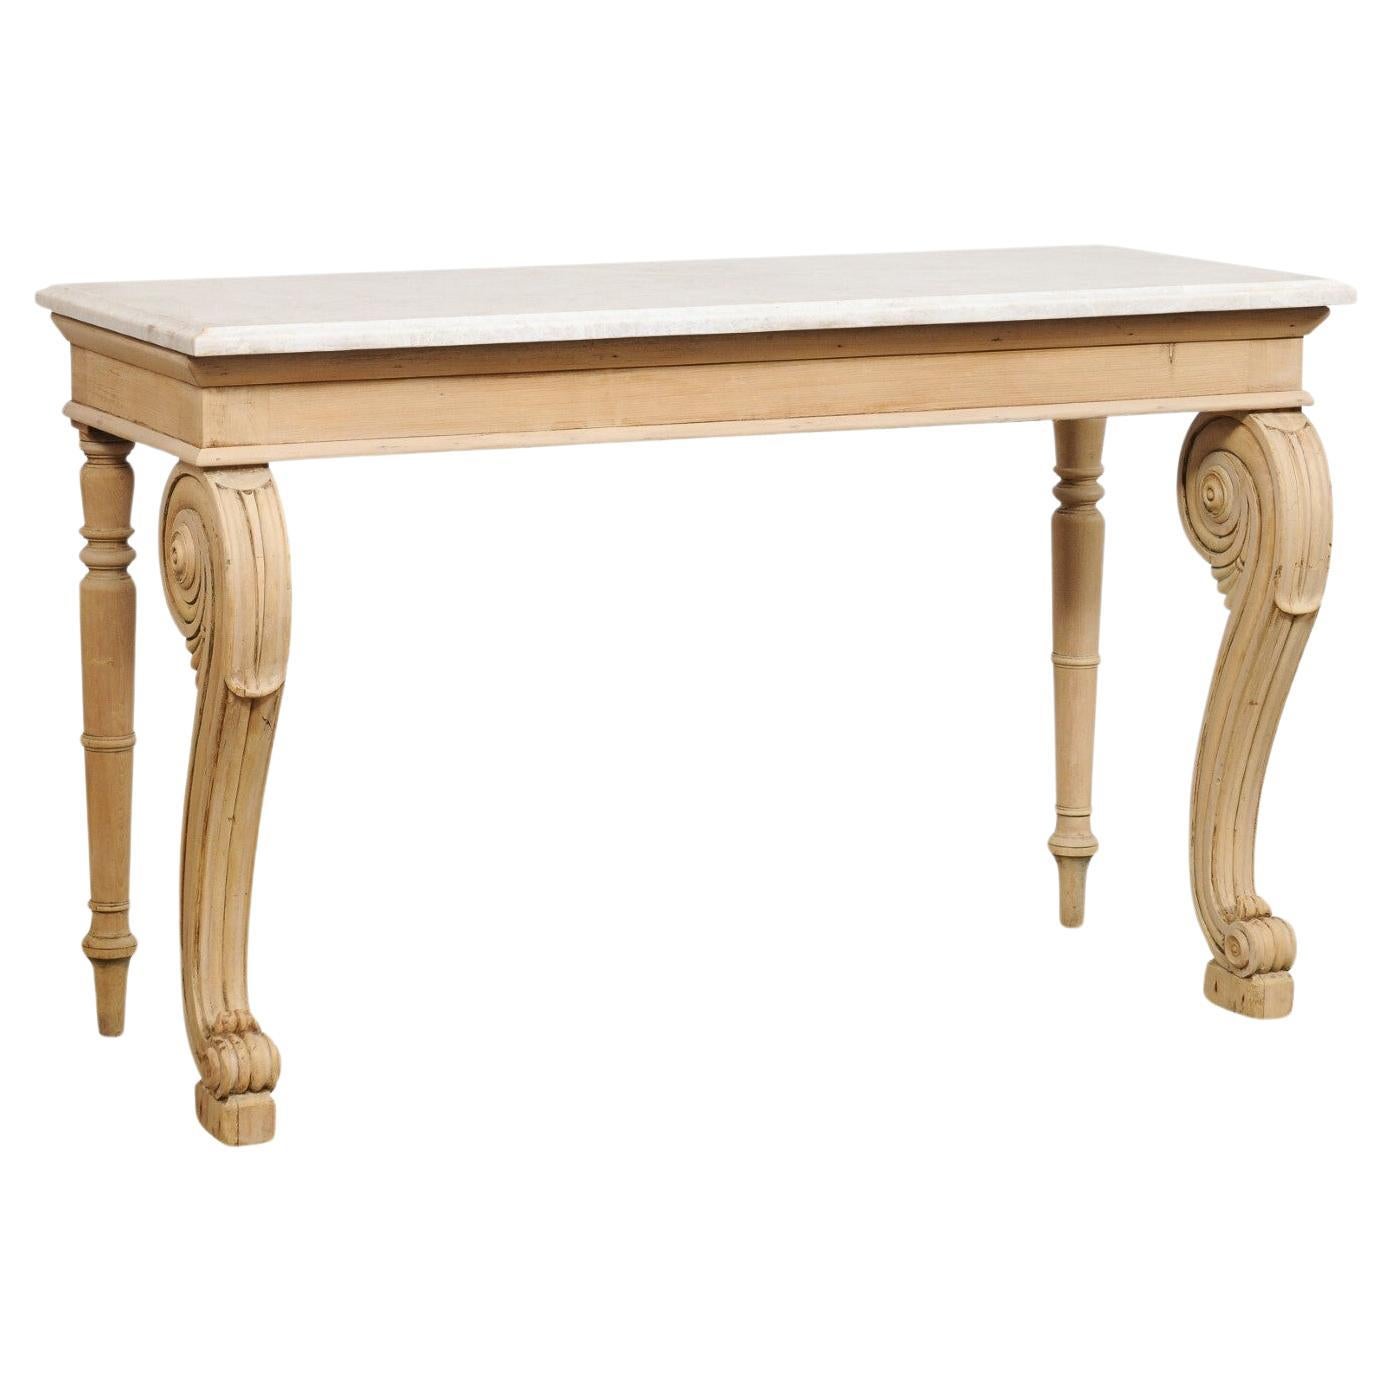 English Regency Period Bleached Wood Console w/Marble Top & Volute Carved Legs For Sale